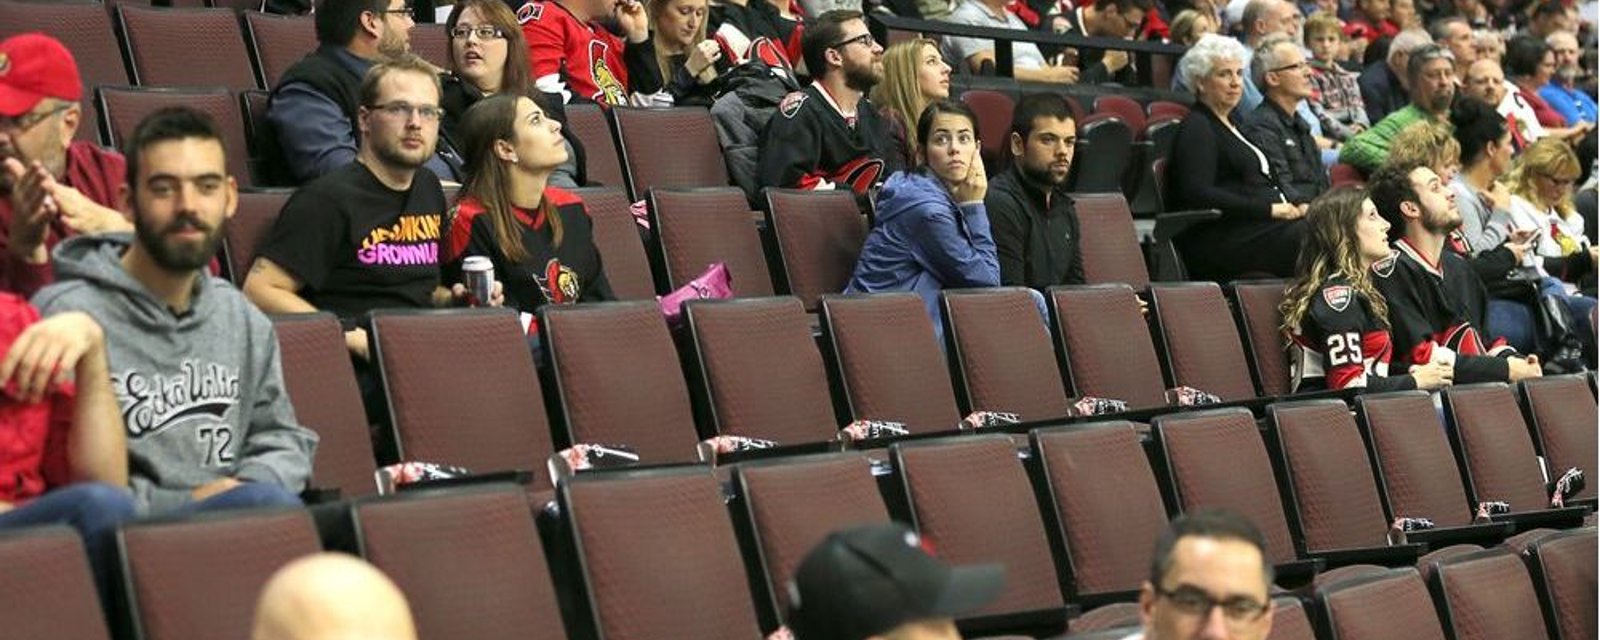 The Sens send out new Season Ticket holder perks with picture of a fan flipping them off in the background! 